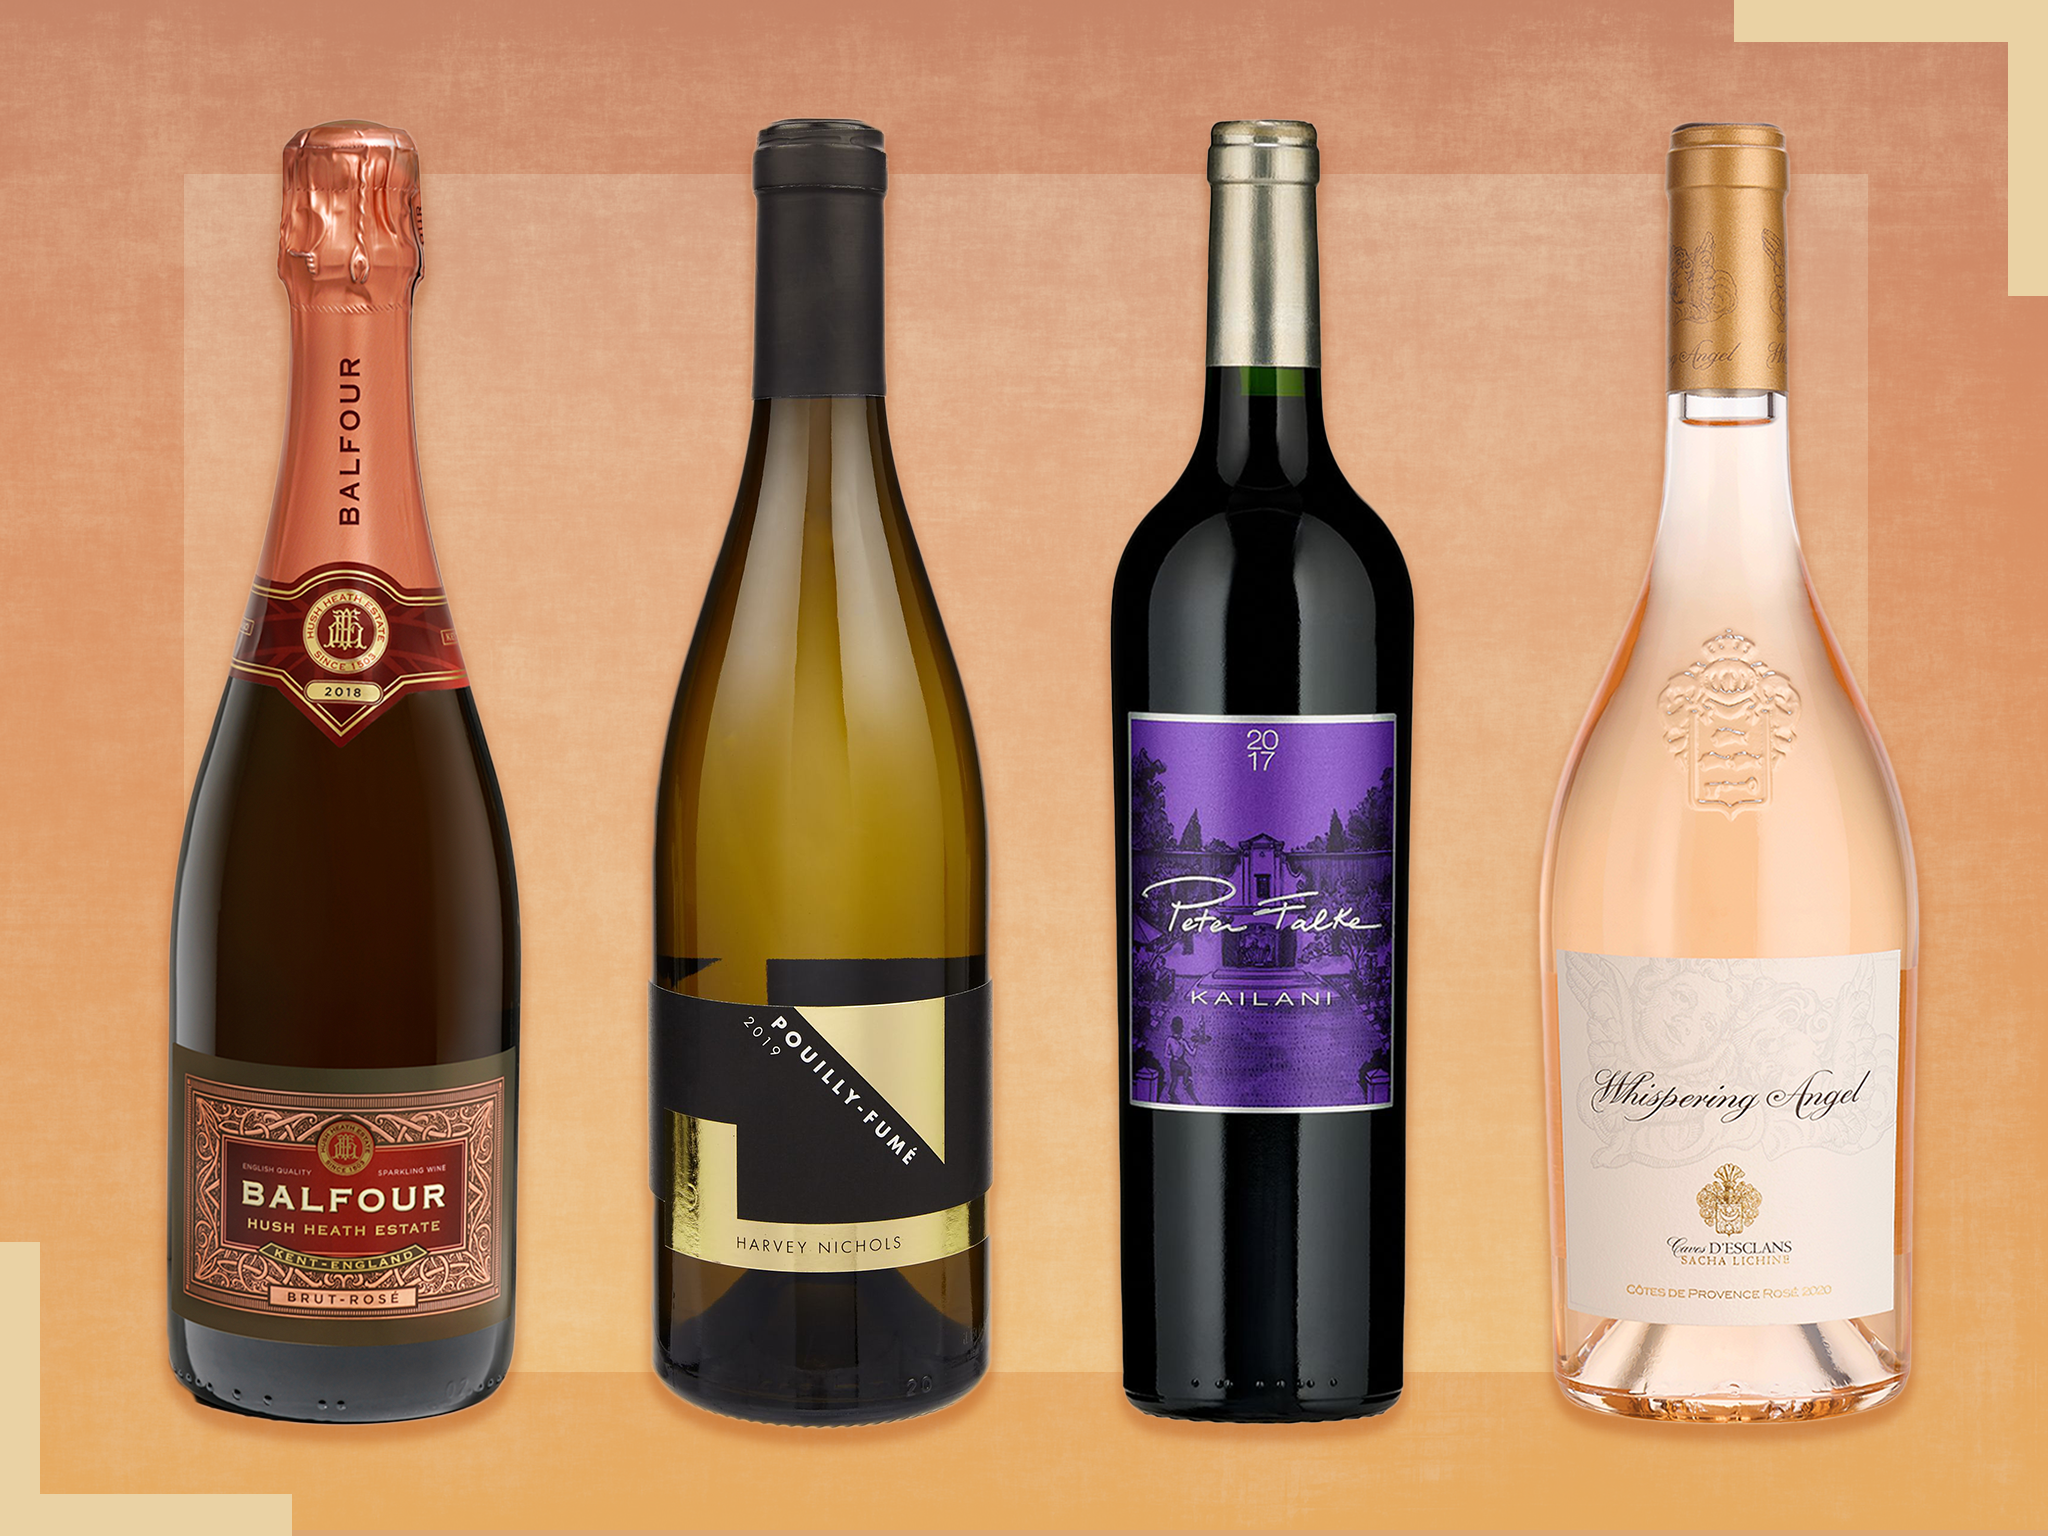 Best wines for a romantic date night: Red, white, pink champagne